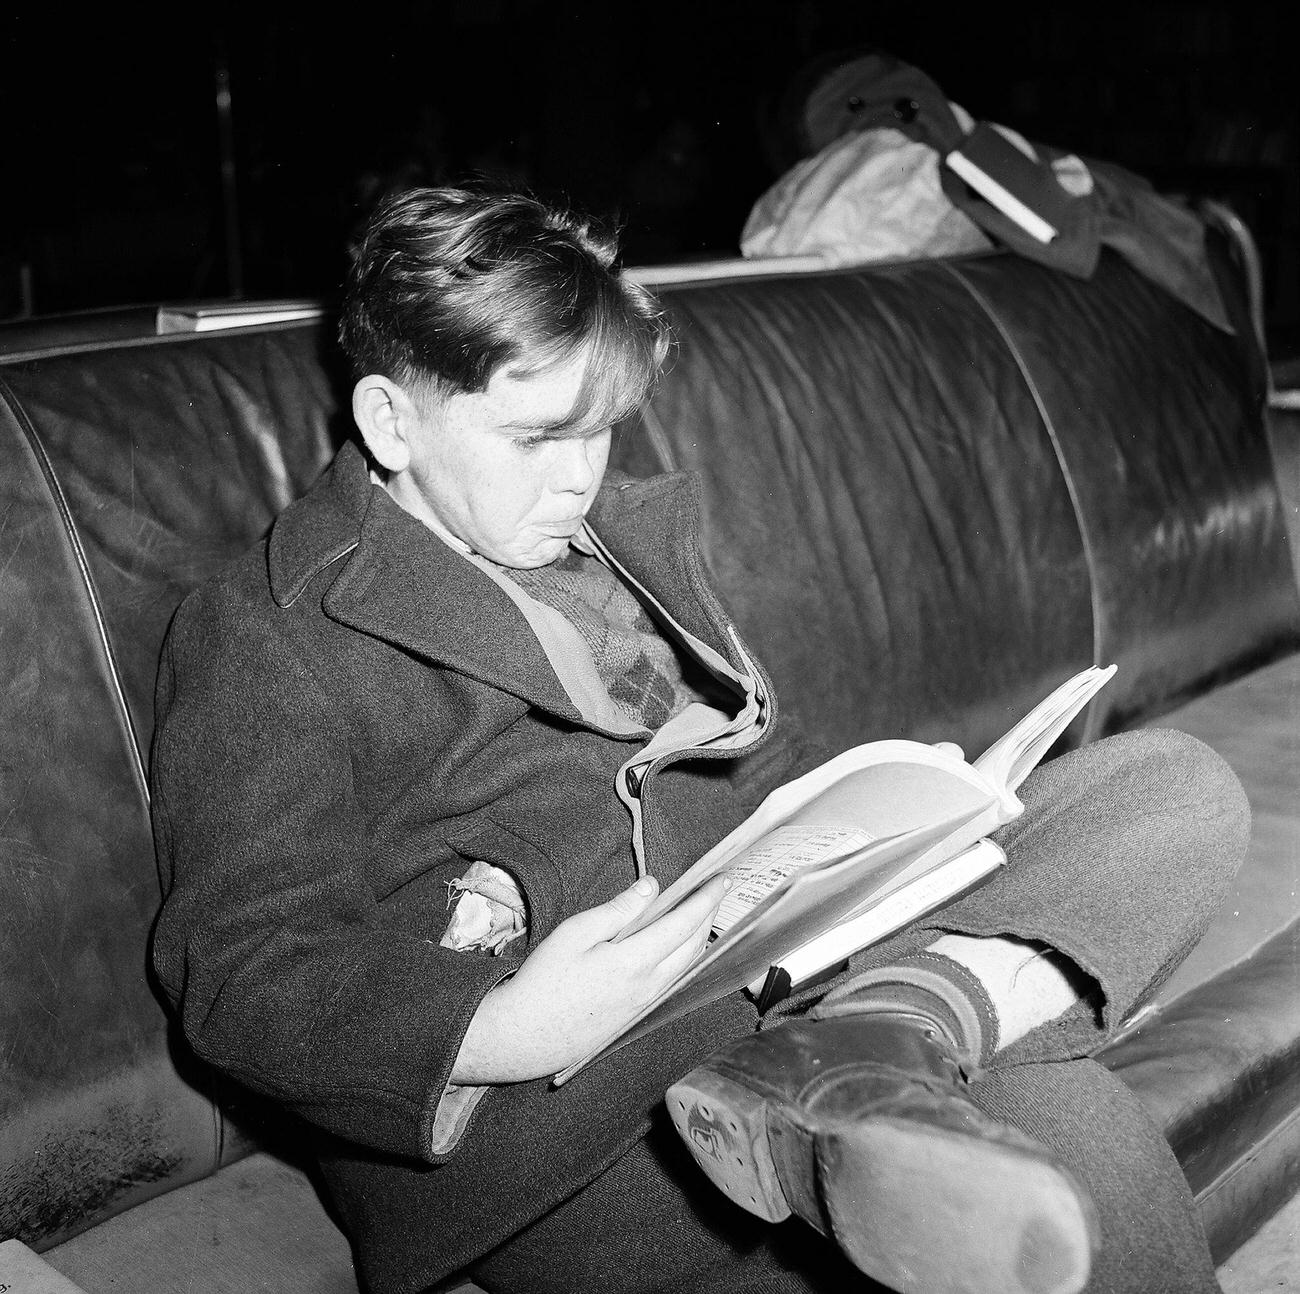 Young Boy Focused On Reading, 1947